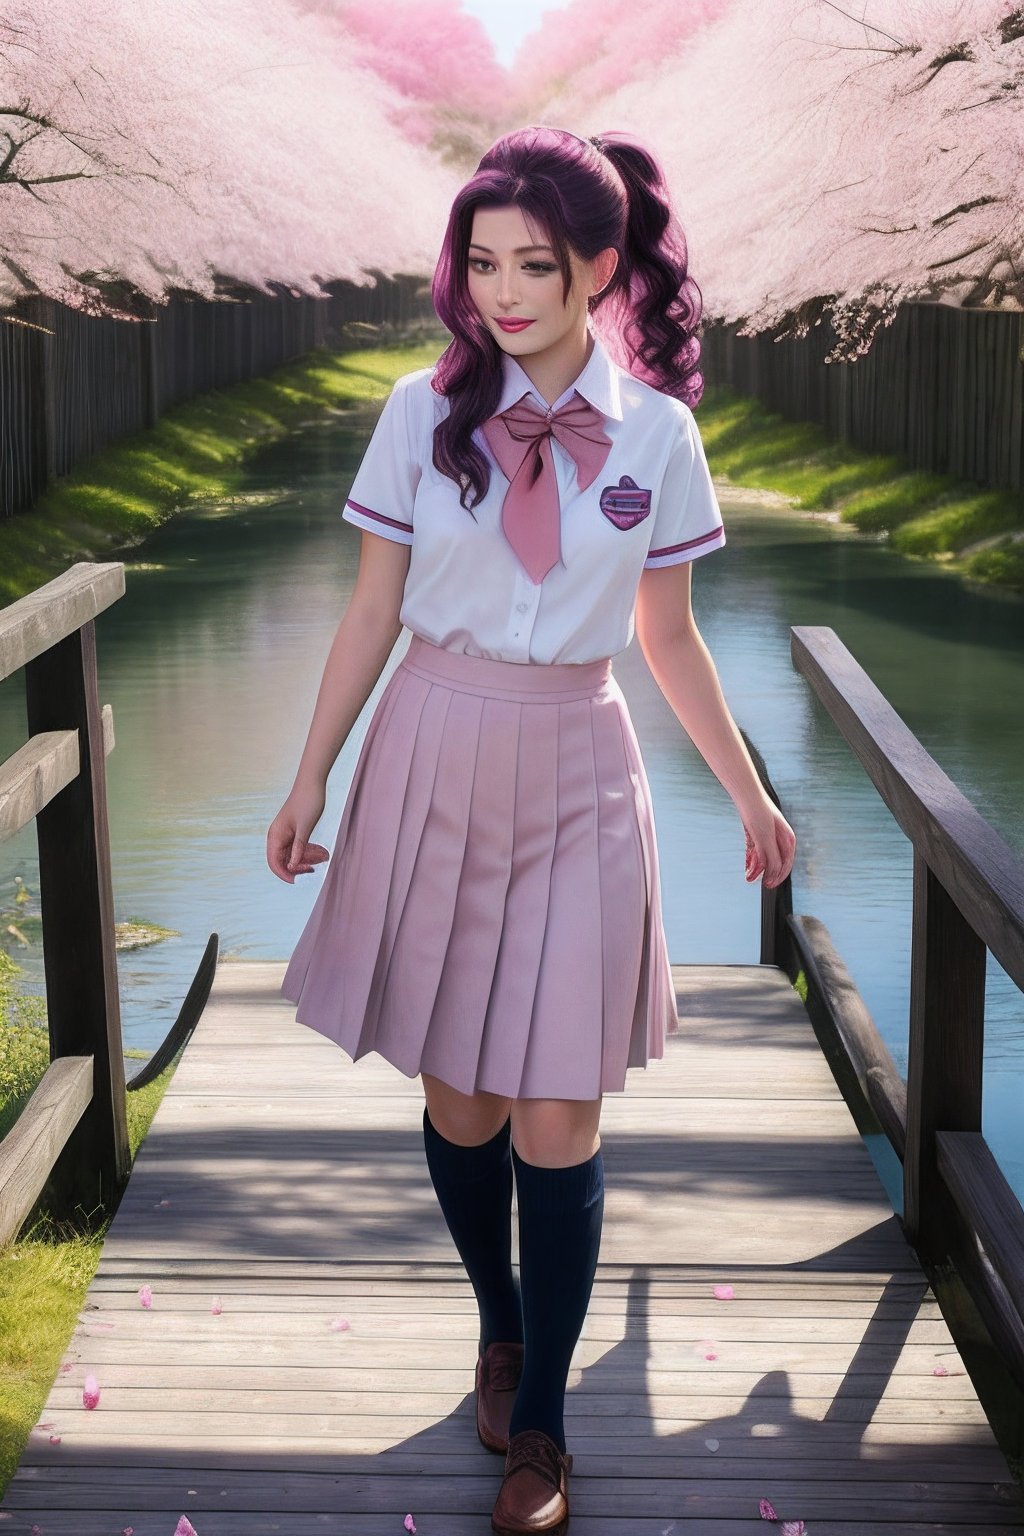 30 yo girl, japan school uniform,purple curly hair, look at the camera,long_ponytail, standing on a wood bridge,curved bridge, hyper realistic river, peach tree, flying pink petals, realistic shadows,high contrast, ray of lights, muted colors,fireflys